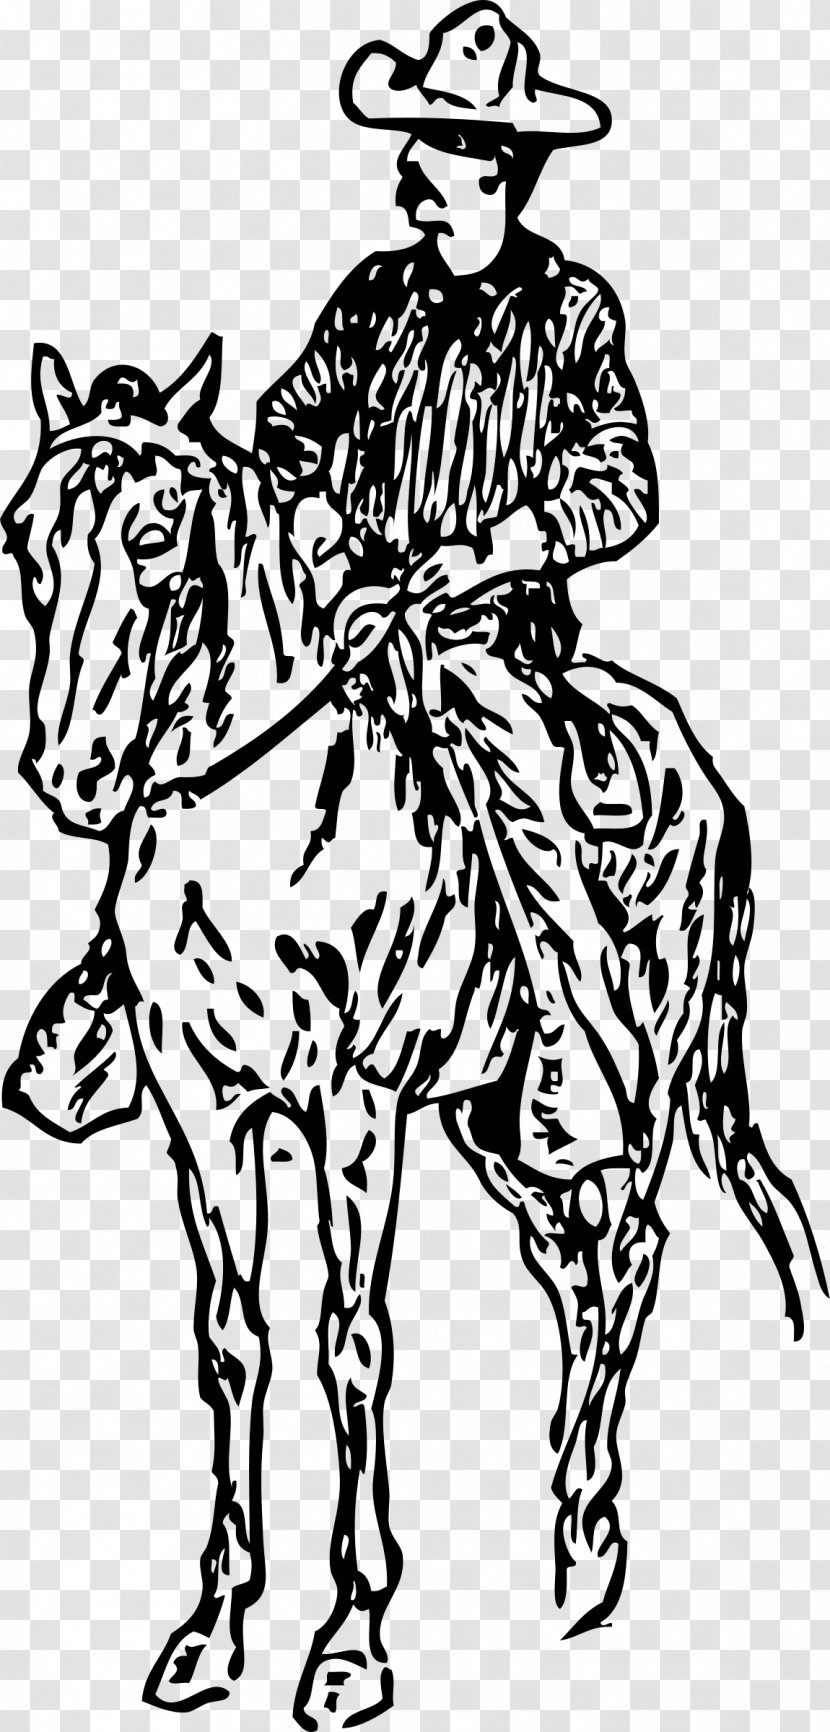 Horse Equestrian Drawing Cowboy Clip Art - Cattle Like Mammal Transparent PNG